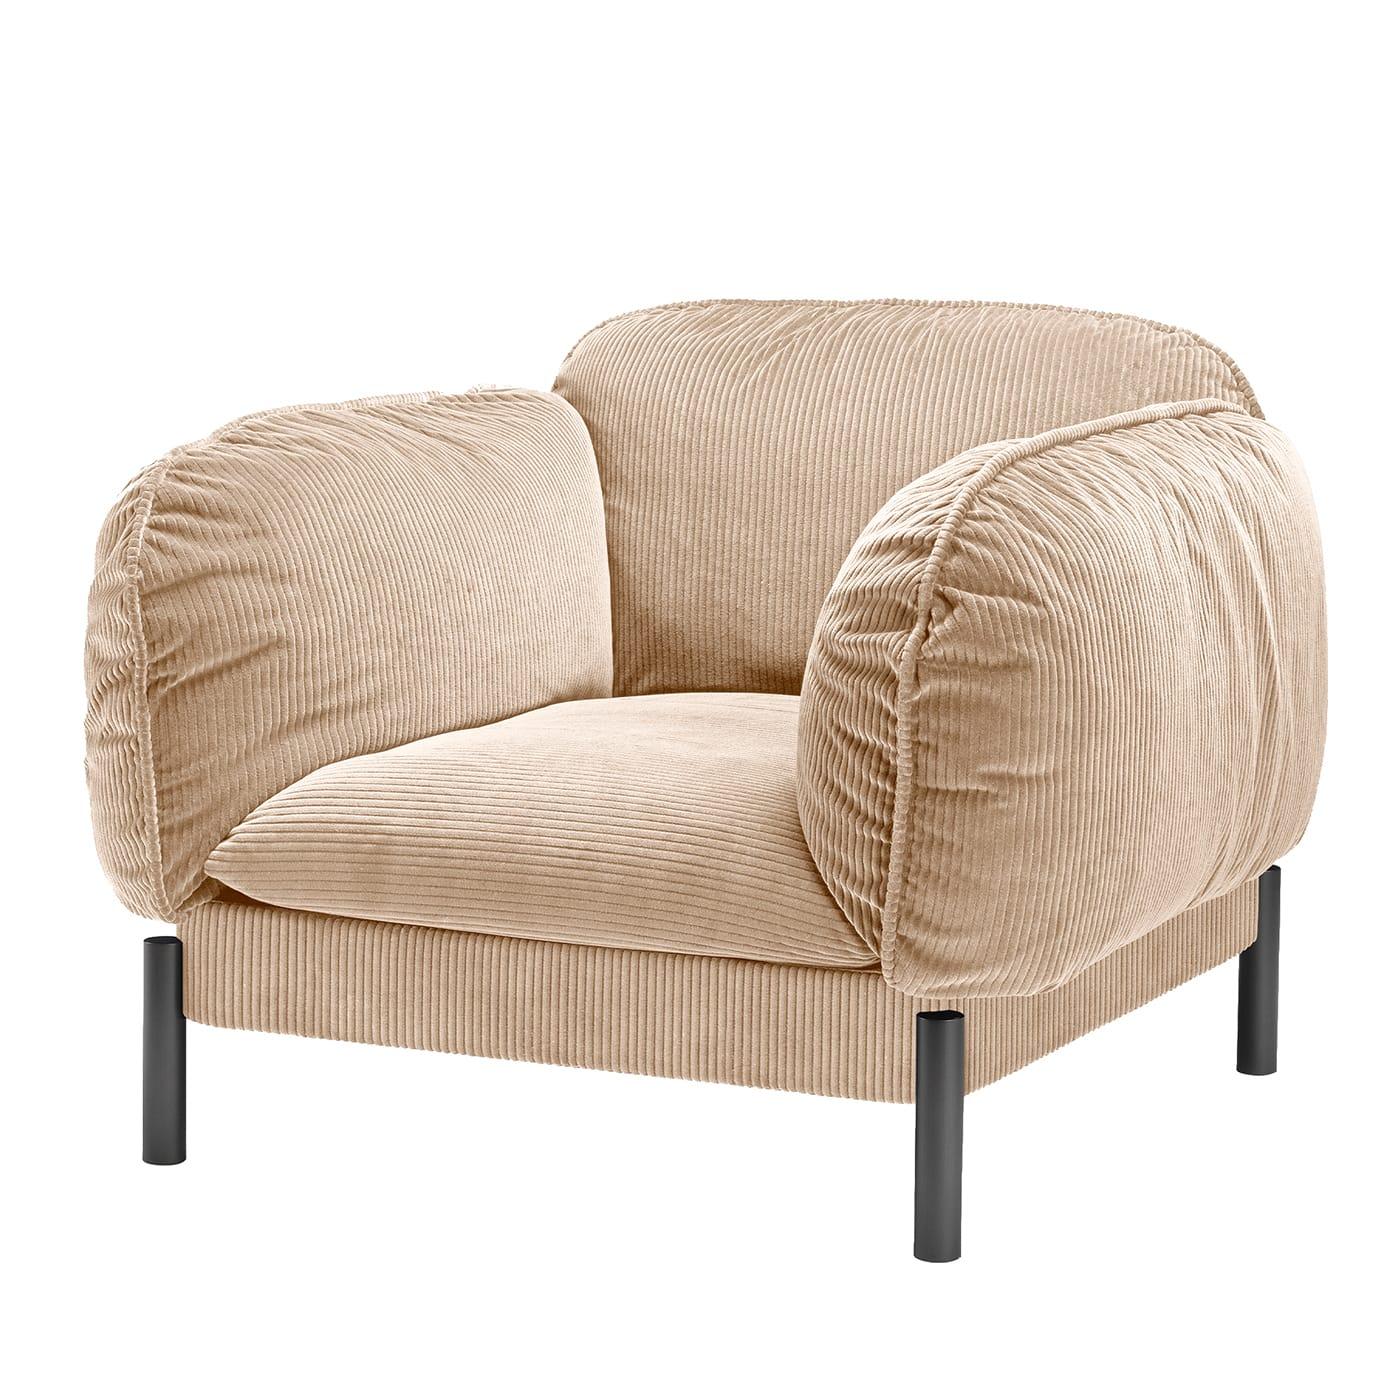 Generous in its plush padding entirely covered in corduroy in a refined shade of beige, this armchair makes for the ideal nest where to enjoy moments of pure relaxation. Cylindrical feet lacquered in black raise the design from the floor, accenting